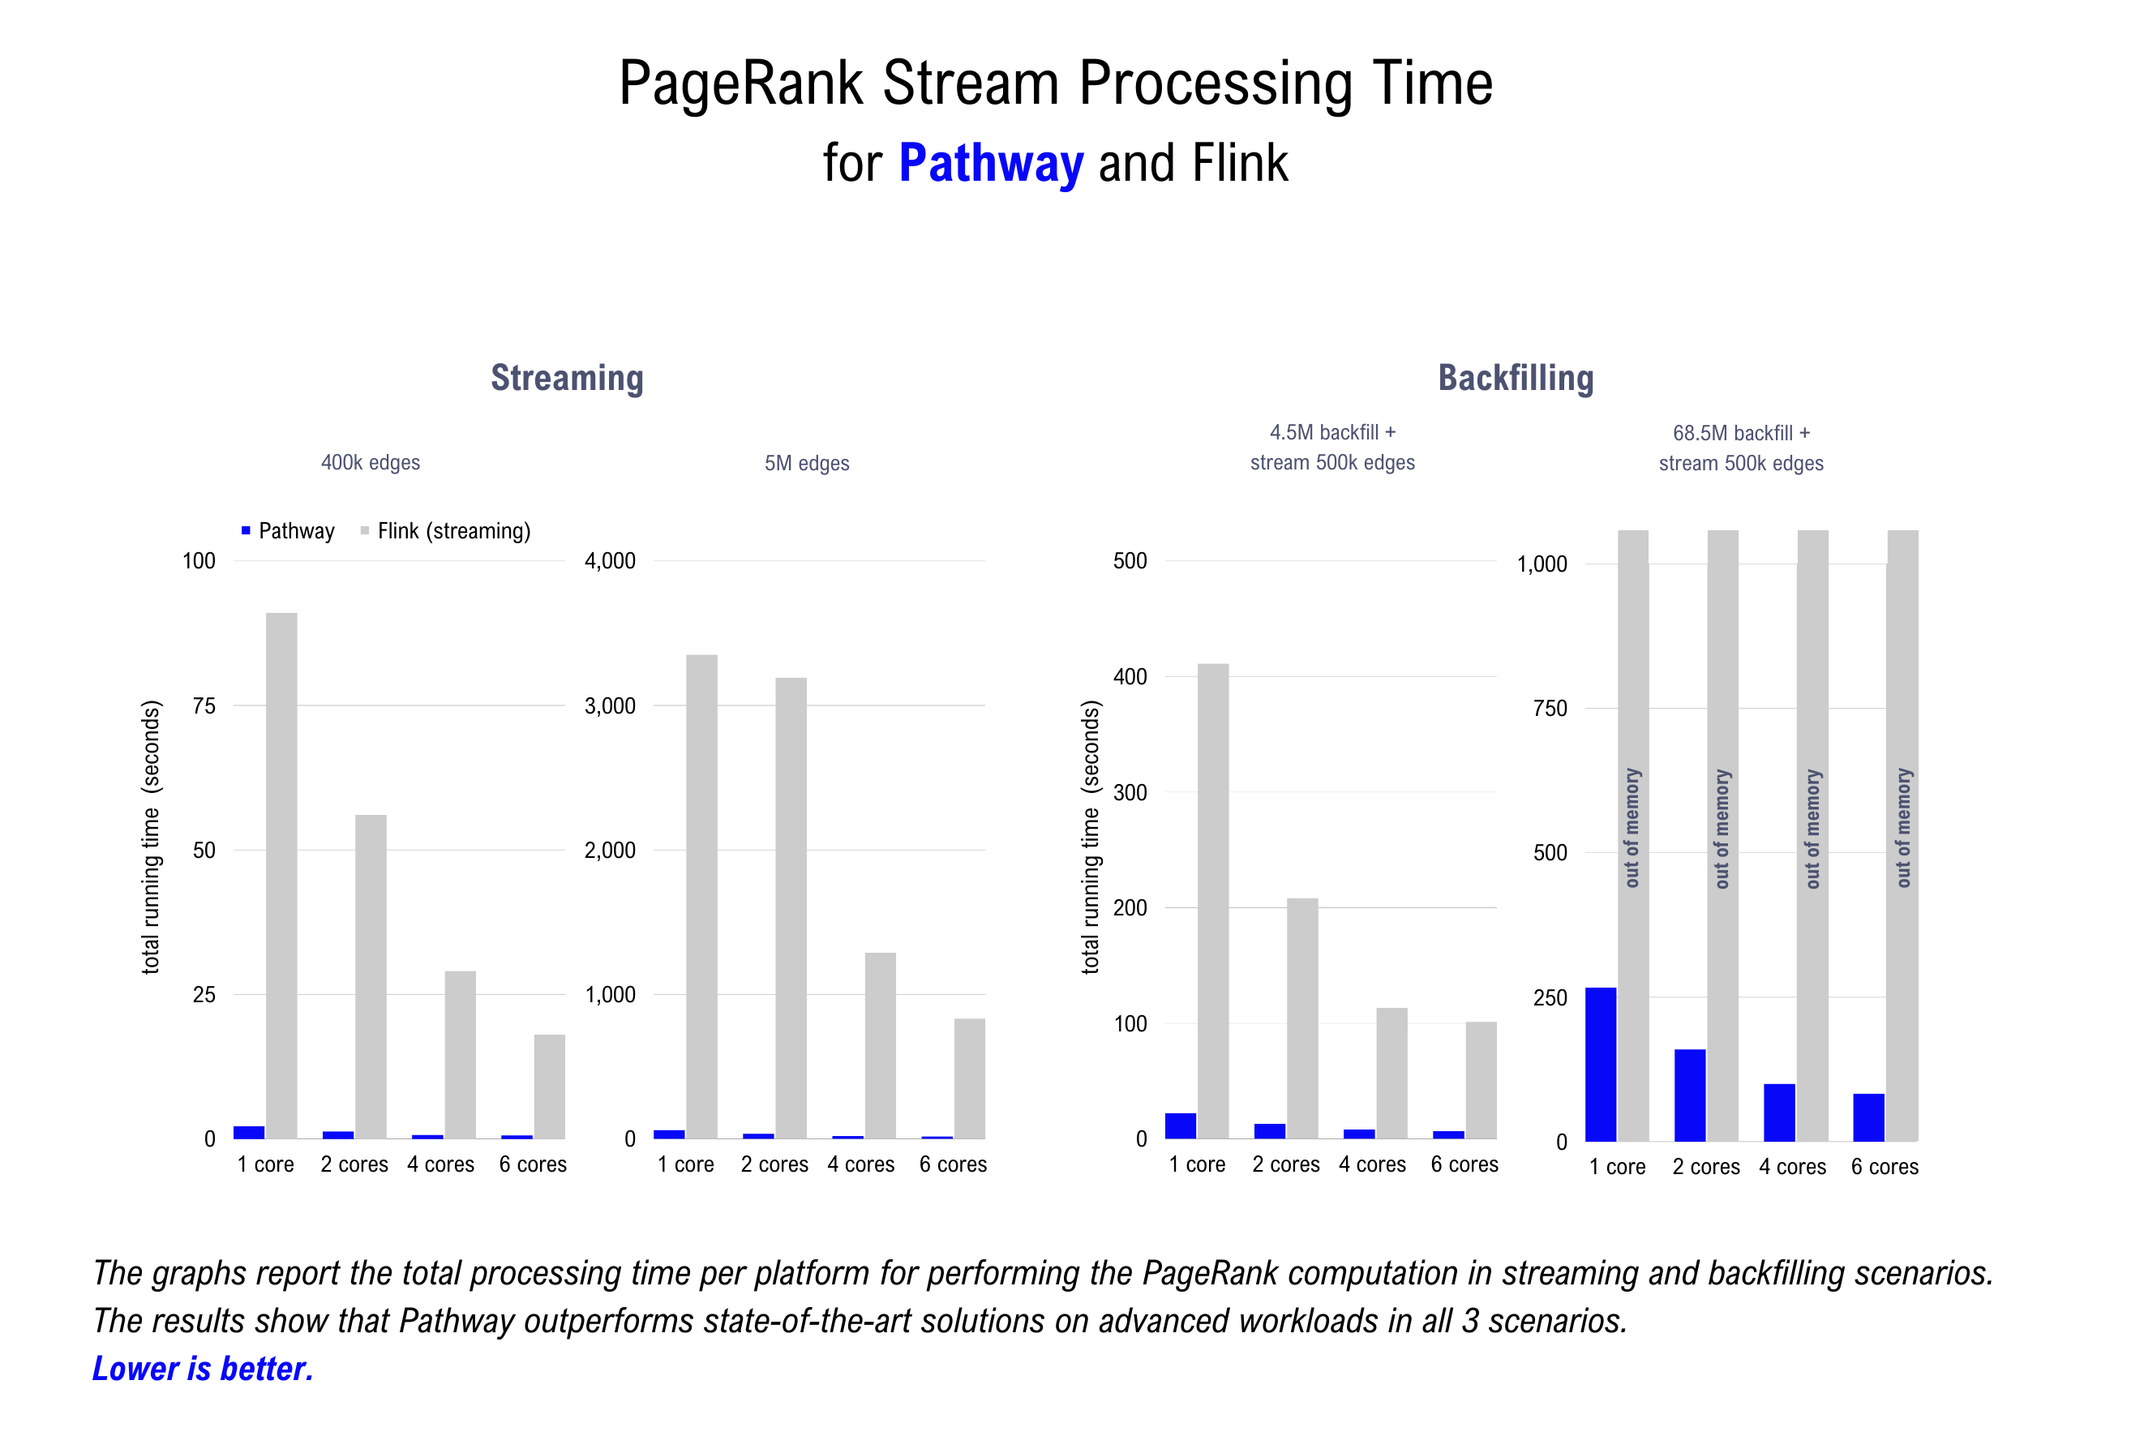 Four bar plots side-by-side showing the results of the PageRank benchmarks. The left group of 2 bar plots shows the results for the streaming benchmark. The right set of 2 bar plots shows the results for the backfilling benchmark.